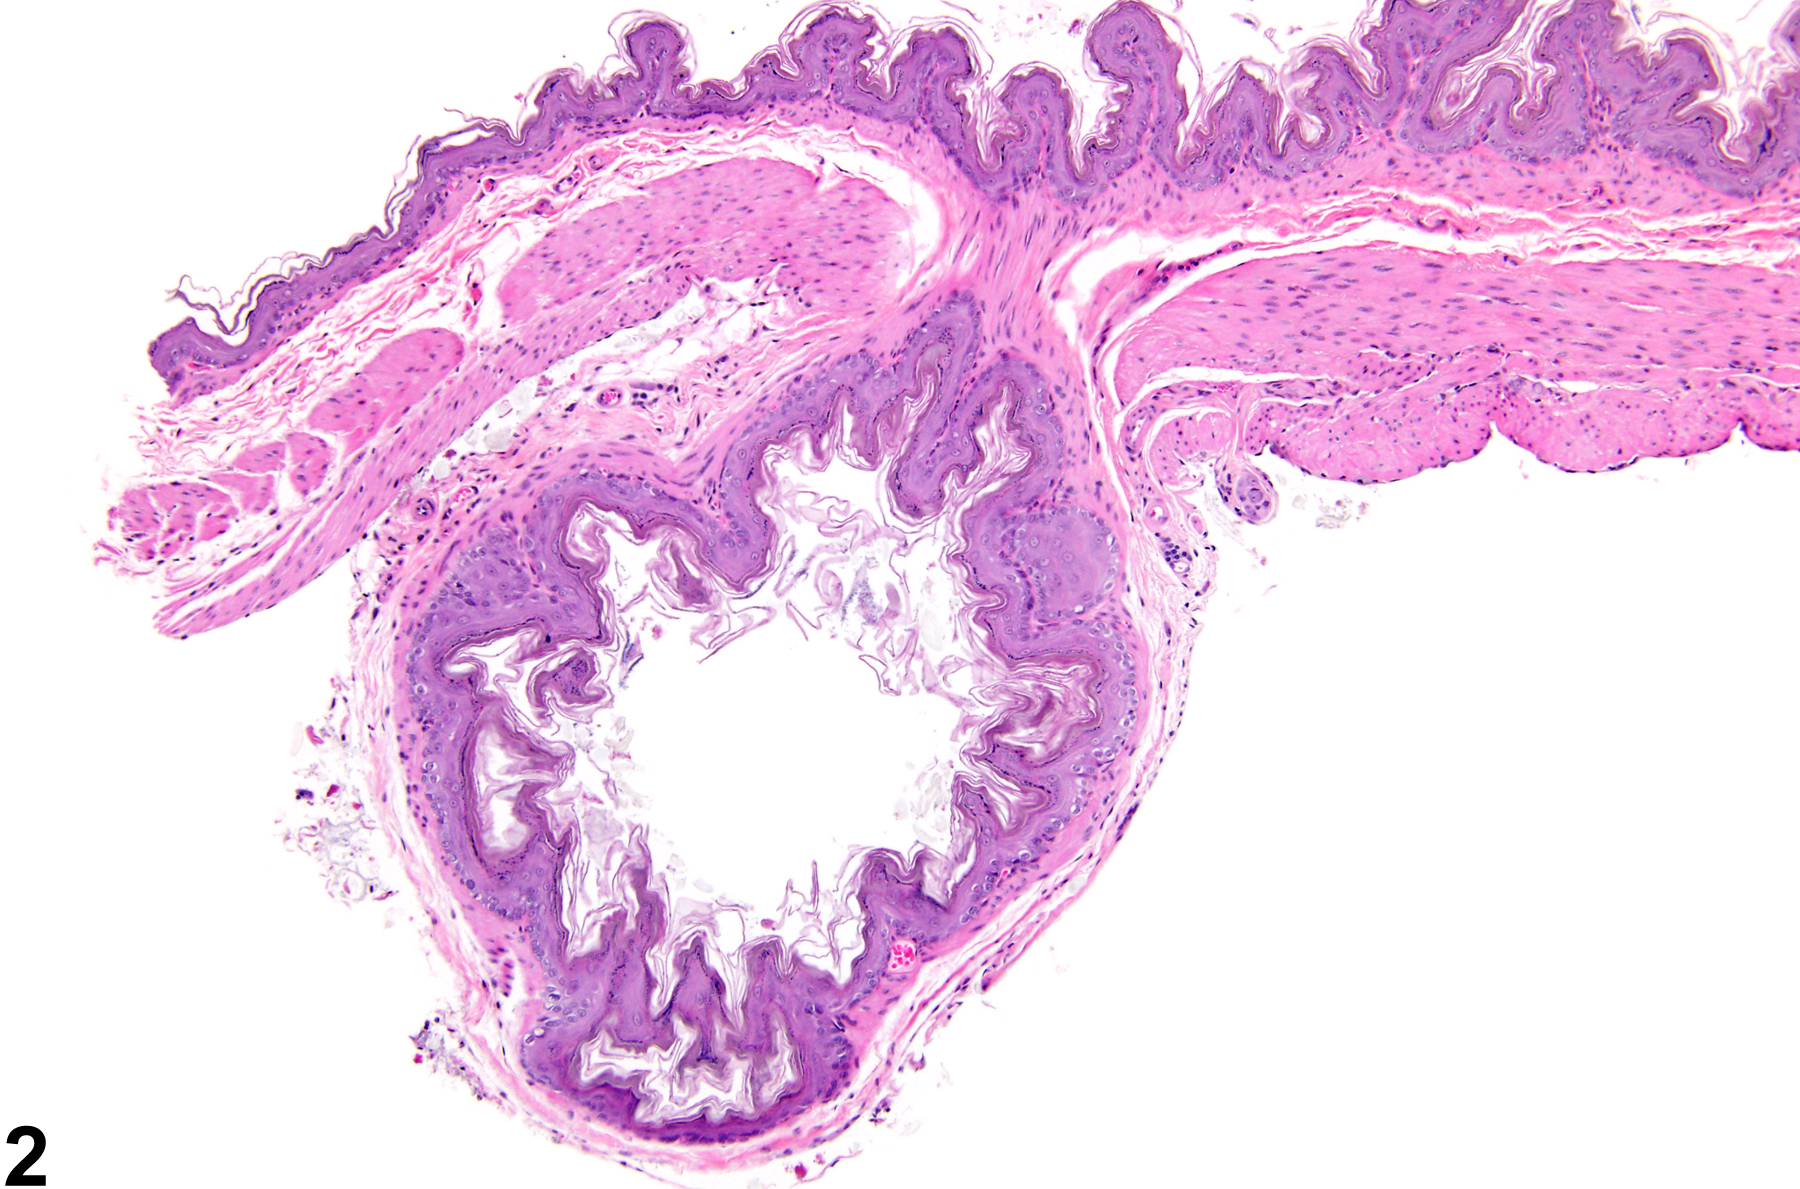 Image of diverticulum in the forestomach from a male B6C3F1 mouse in a chronic study